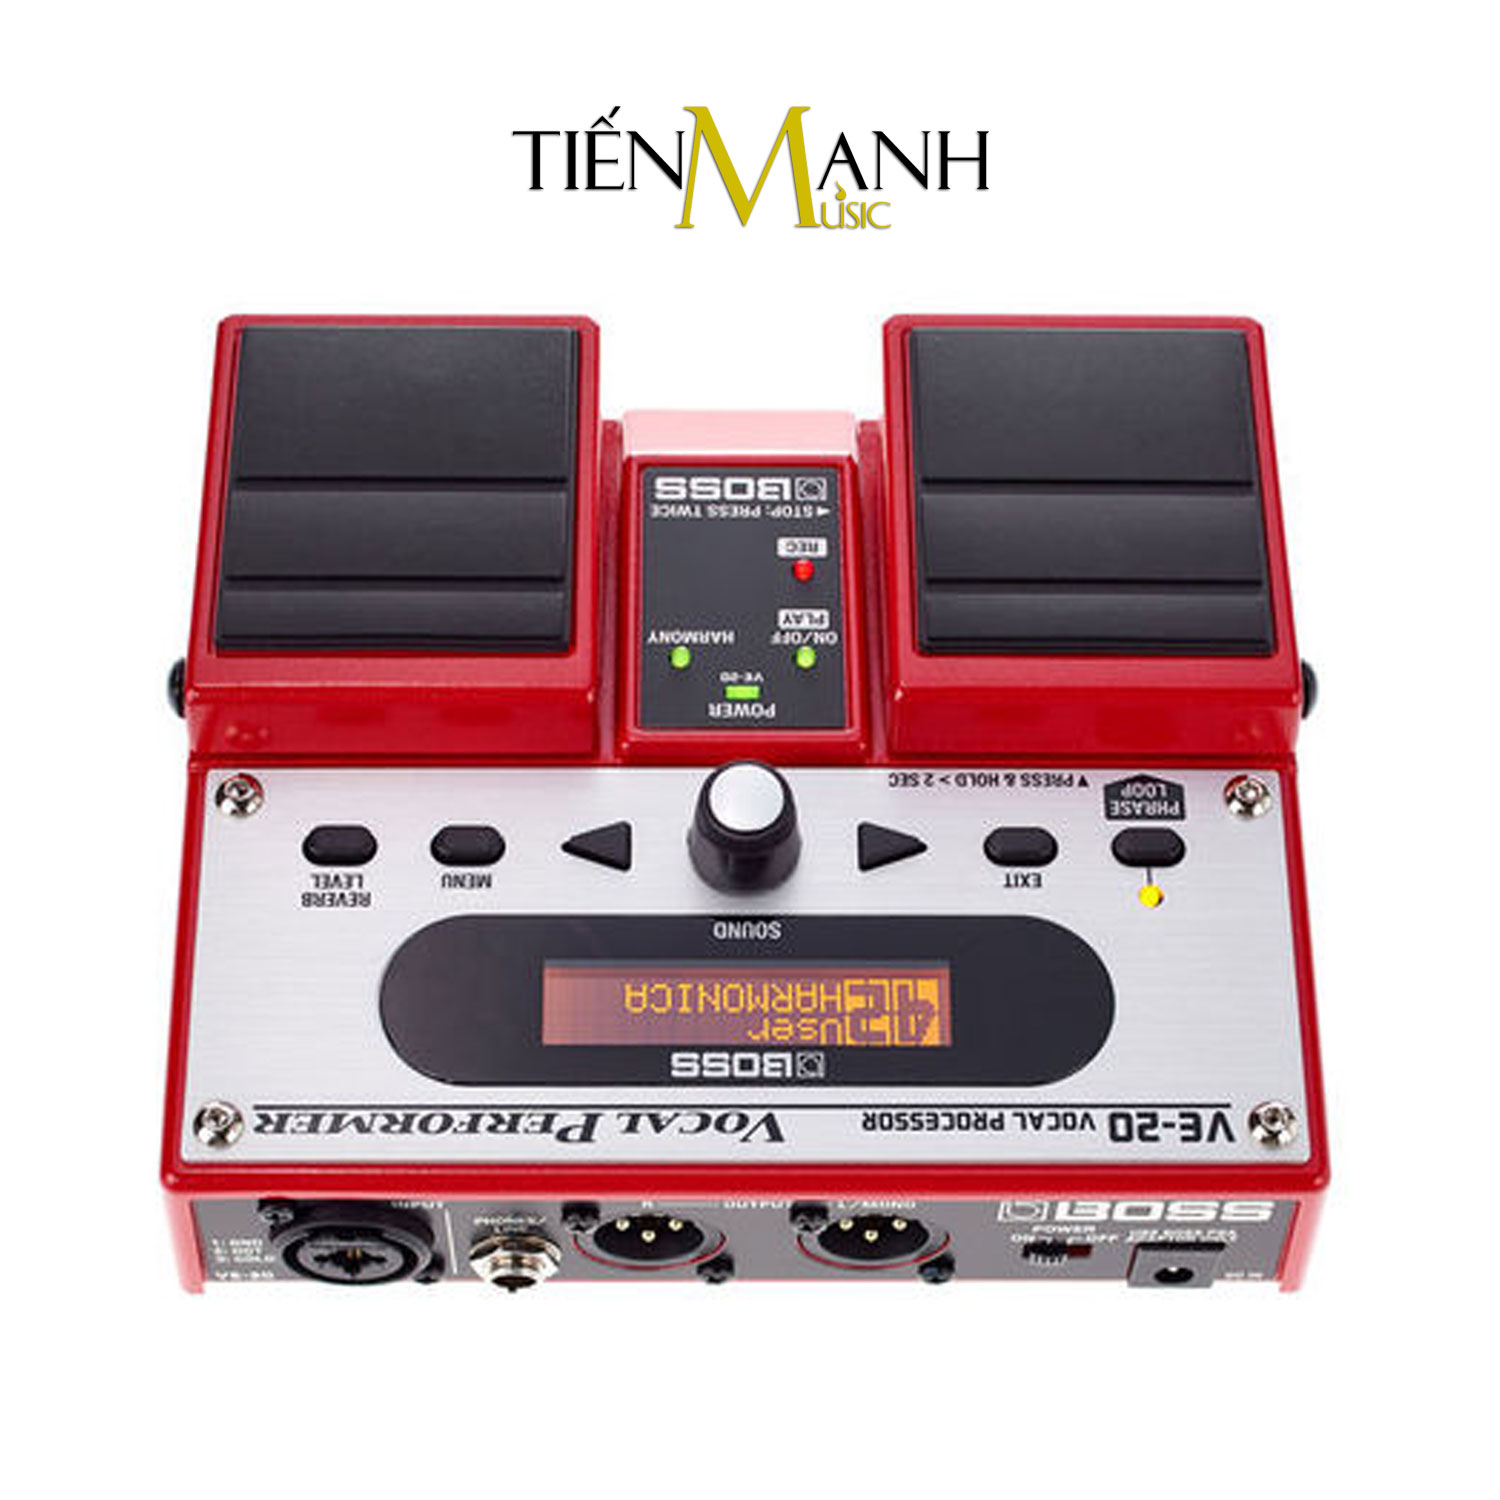 Cach-su-dung-Boss-VE-20-Vocal-Processor-Stompbox.jpg